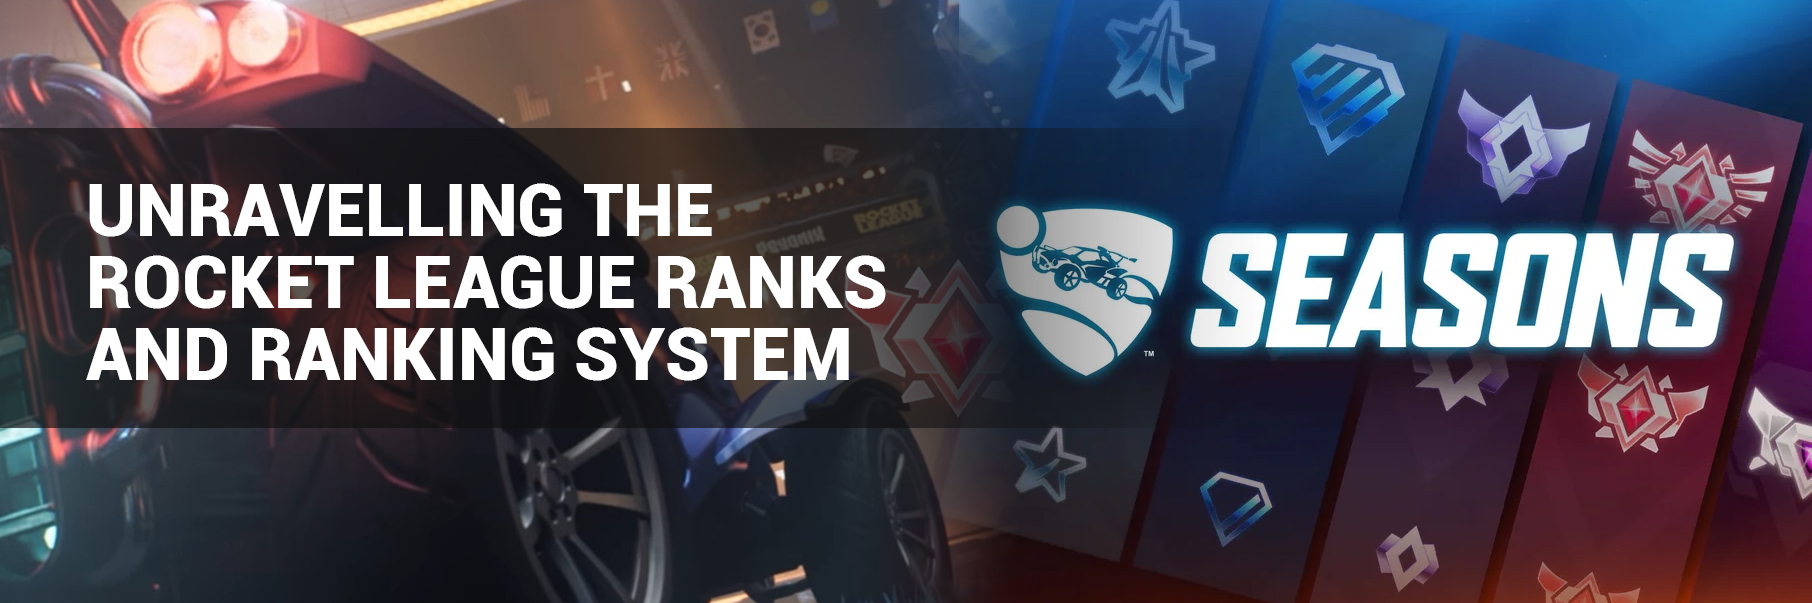 Unravelling the Rocket League Ranks and Ranking System